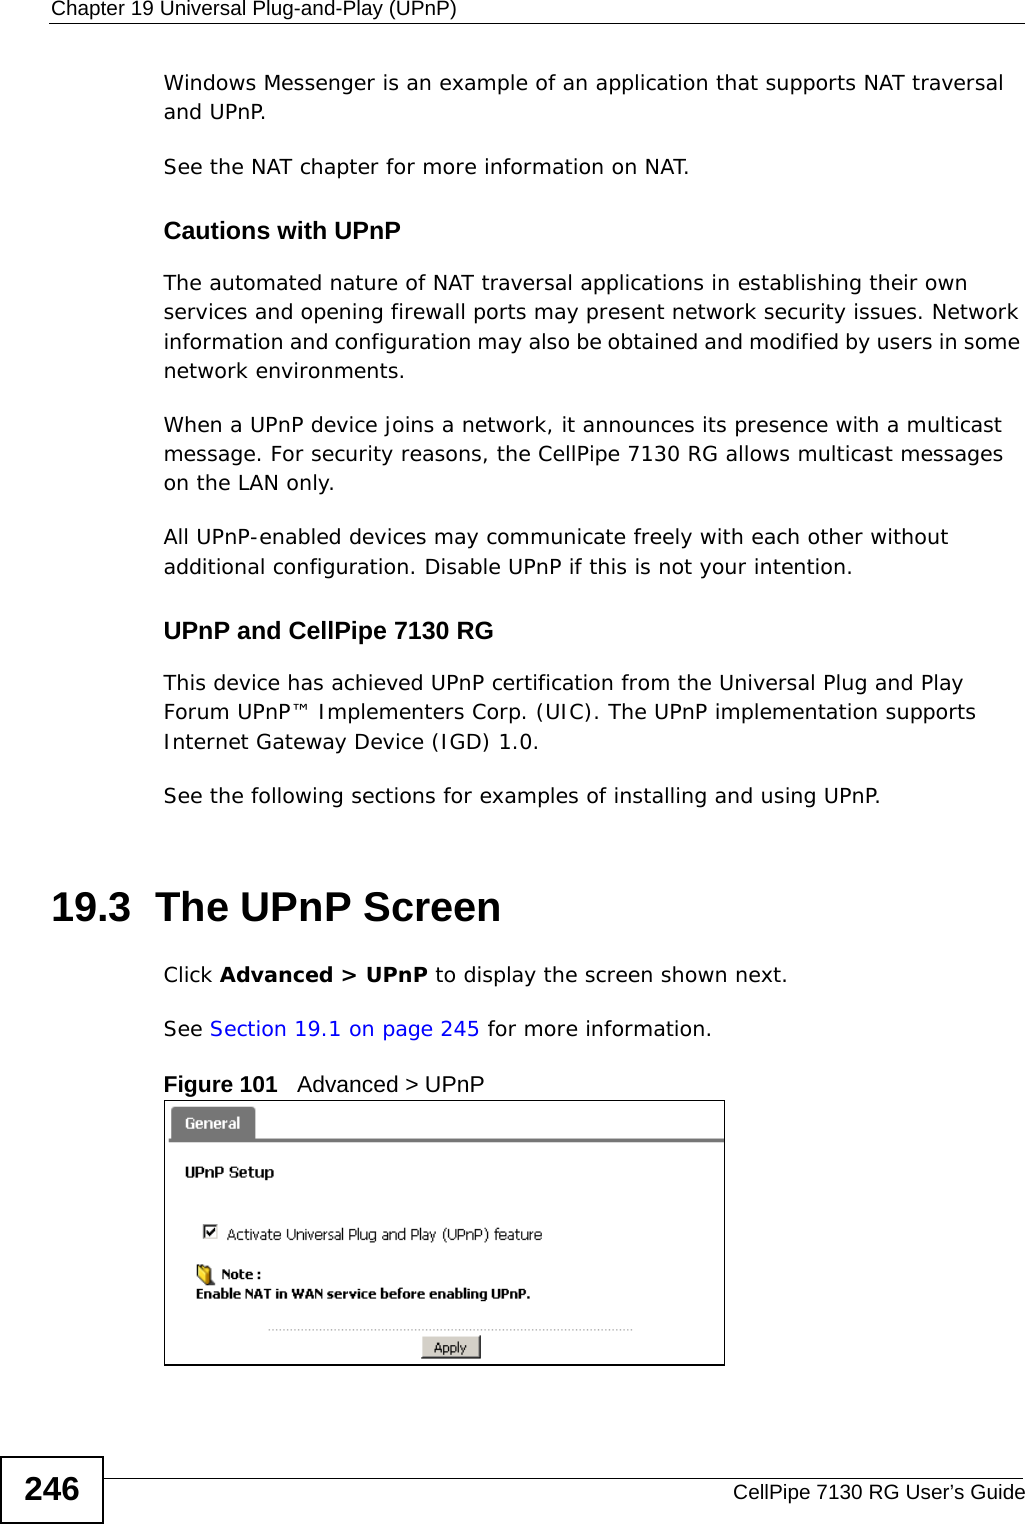 Chapter 19 Universal Plug-and-Play (UPnP)CellPipe 7130 RG User’s Guide246Windows Messenger is an example of an application that supports NAT traversal and UPnP. See the NAT chapter for more information on NAT.Cautions with UPnPThe automated nature of NAT traversal applications in establishing their own services and opening firewall ports may present network security issues. Network information and configuration may also be obtained and modified by users in some network environments. When a UPnP device joins a network, it announces its presence with a multicast message. For security reasons, the CellPipe 7130 RG allows multicast messages on the LAN only.All UPnP-enabled devices may communicate freely with each other without additional configuration. Disable UPnP if this is not your intention. UPnP and CellPipe 7130 RGThis device has achieved UPnP certification from the Universal Plug and Play Forum UPnP™ Implementers Corp. (UIC). The UPnP implementation supports Internet Gateway Device (IGD) 1.0. See the following sections for examples of installing and using UPnP.19.3  The UPnP ScreenClick Advanced &gt; UPnP to display the screen shown next.See Section 19.1 on page 245 for more information. Figure 101   Advanced &gt; UPnP 